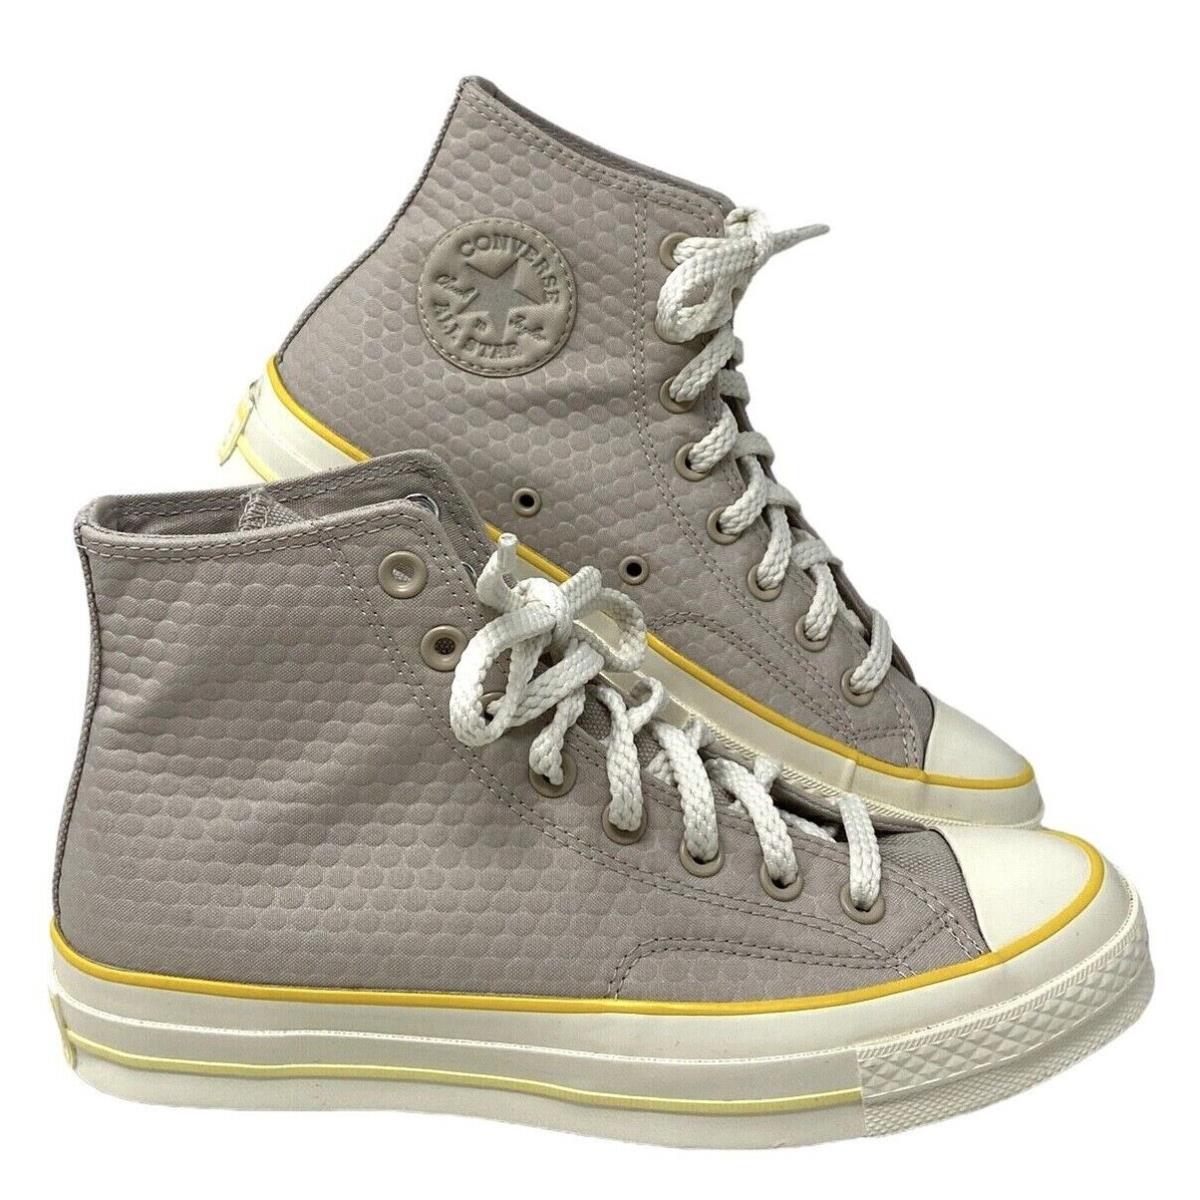 Converse Chuck 70 Sneakers High Canvas Beige Women`s Size Casual Shoes A00878C